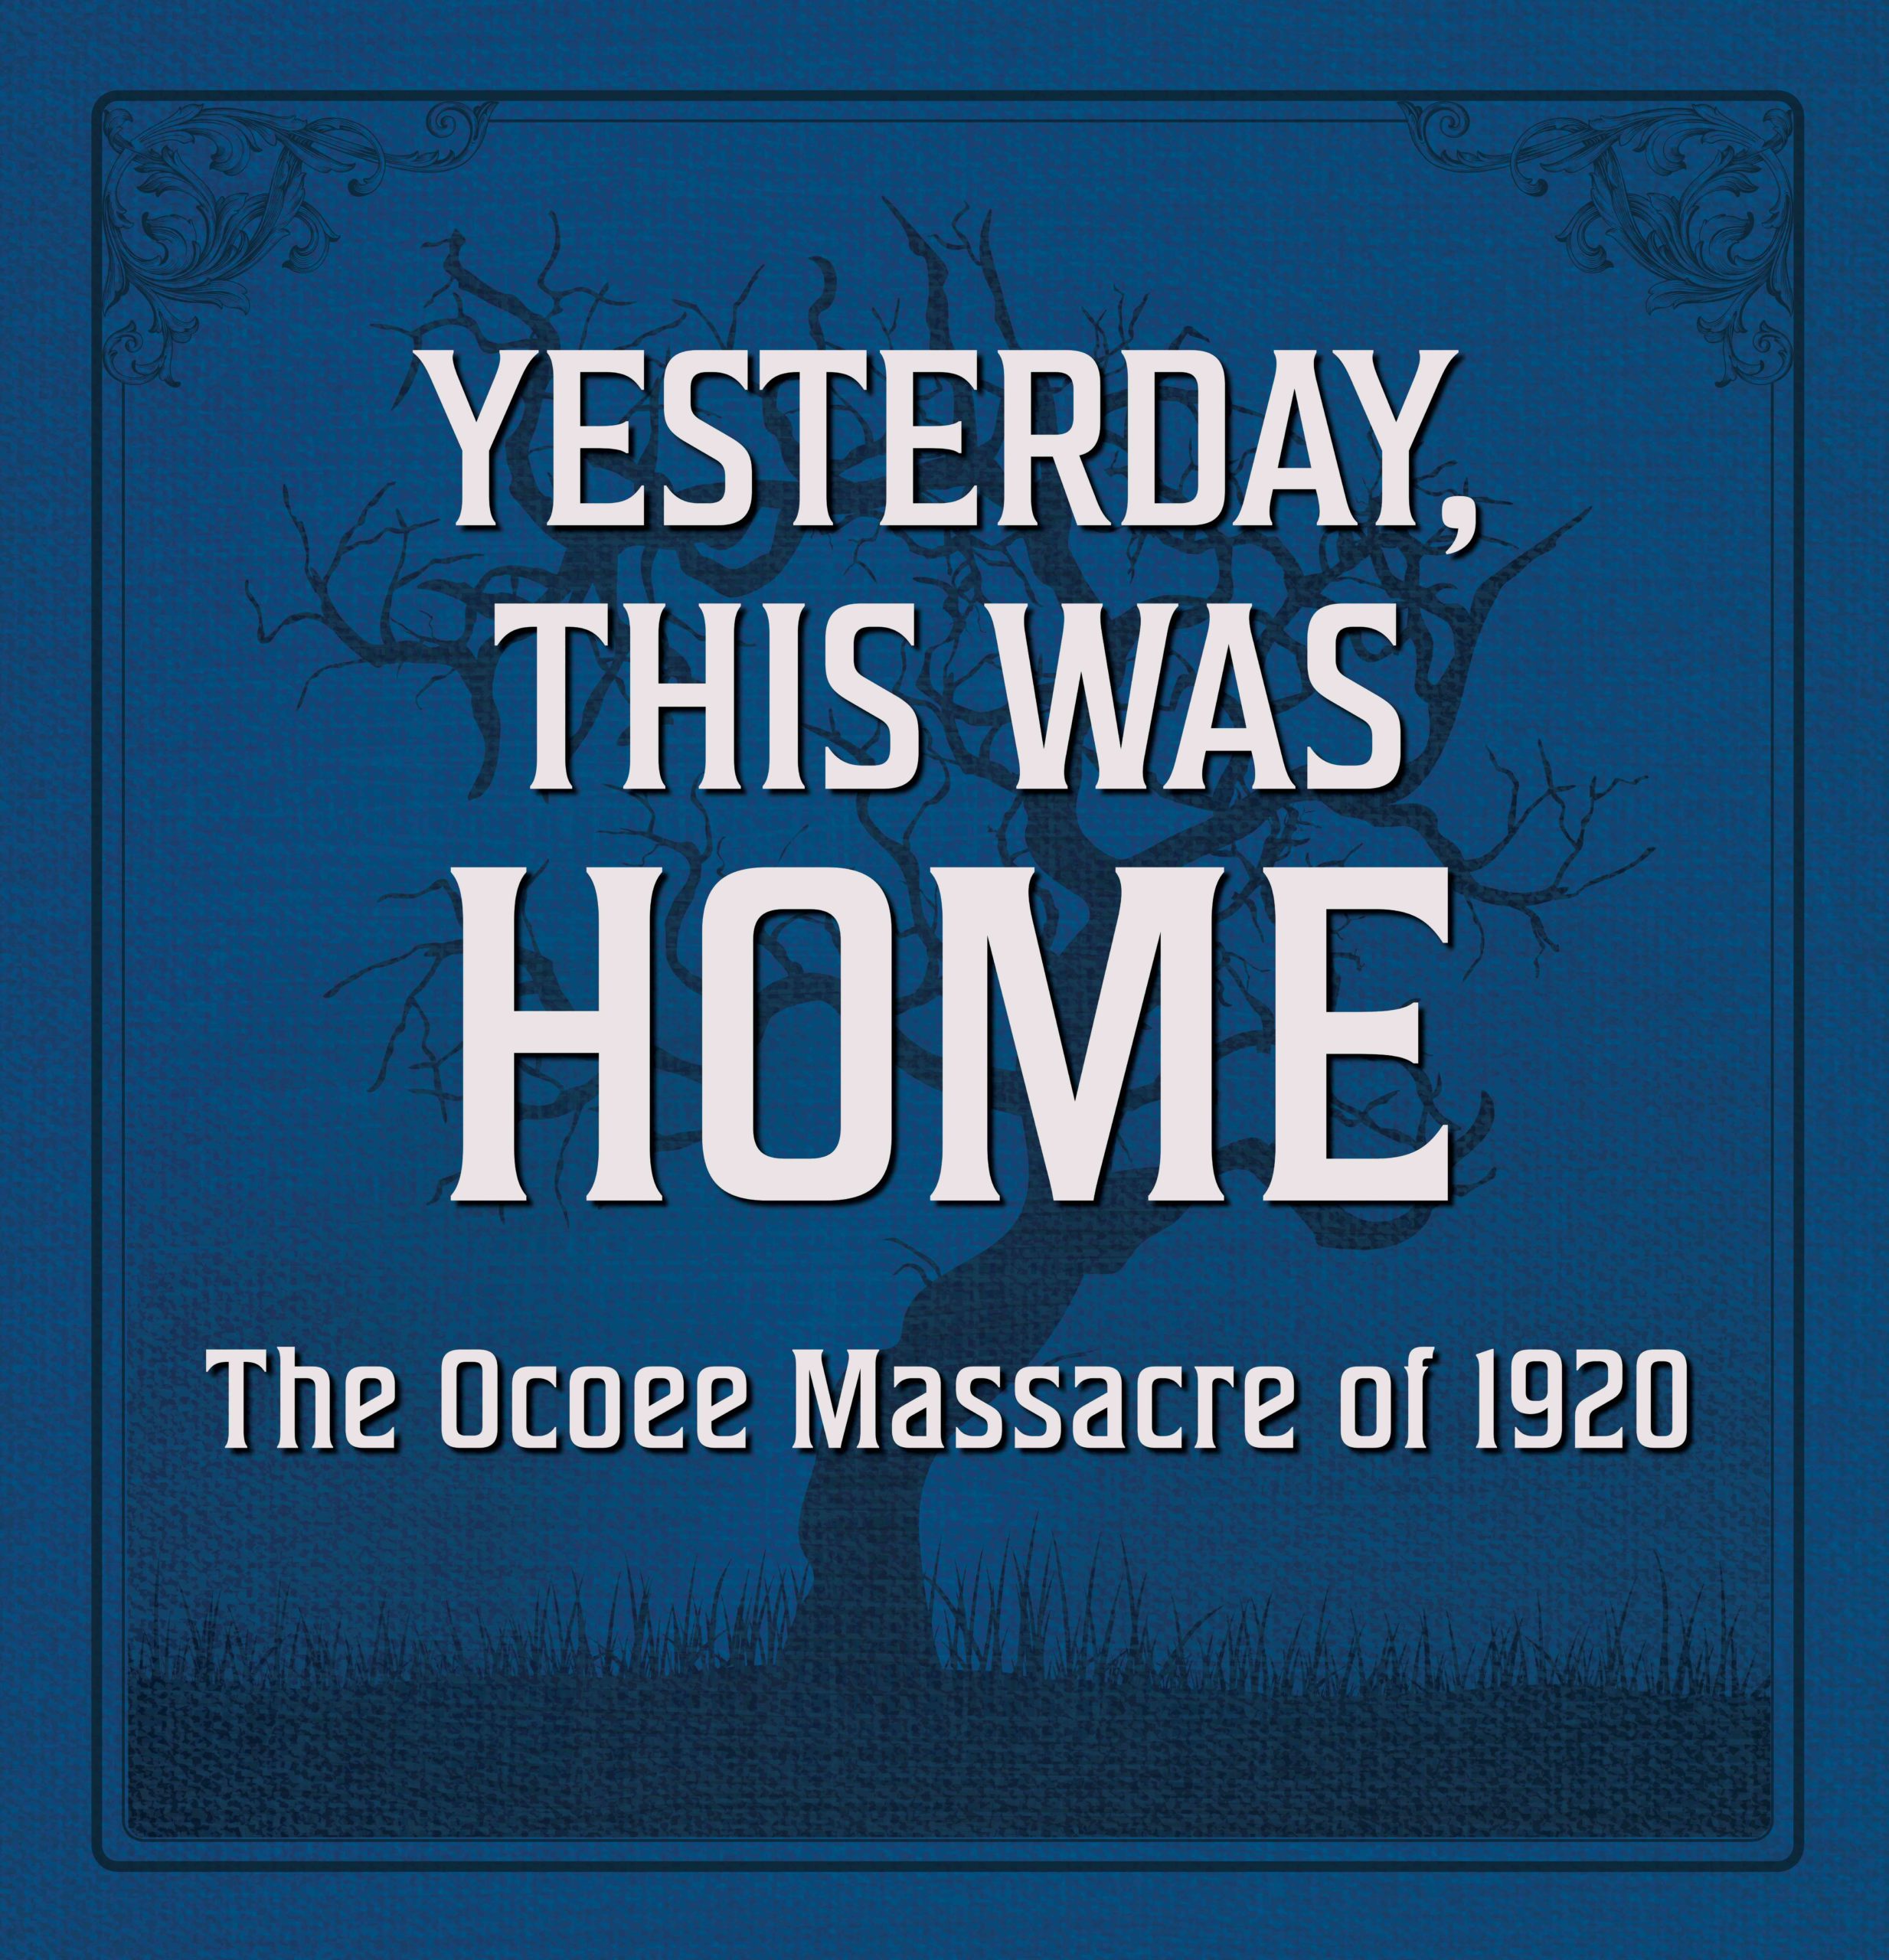 Yesterday, This was Home. The Ocoess Massacre of 1920